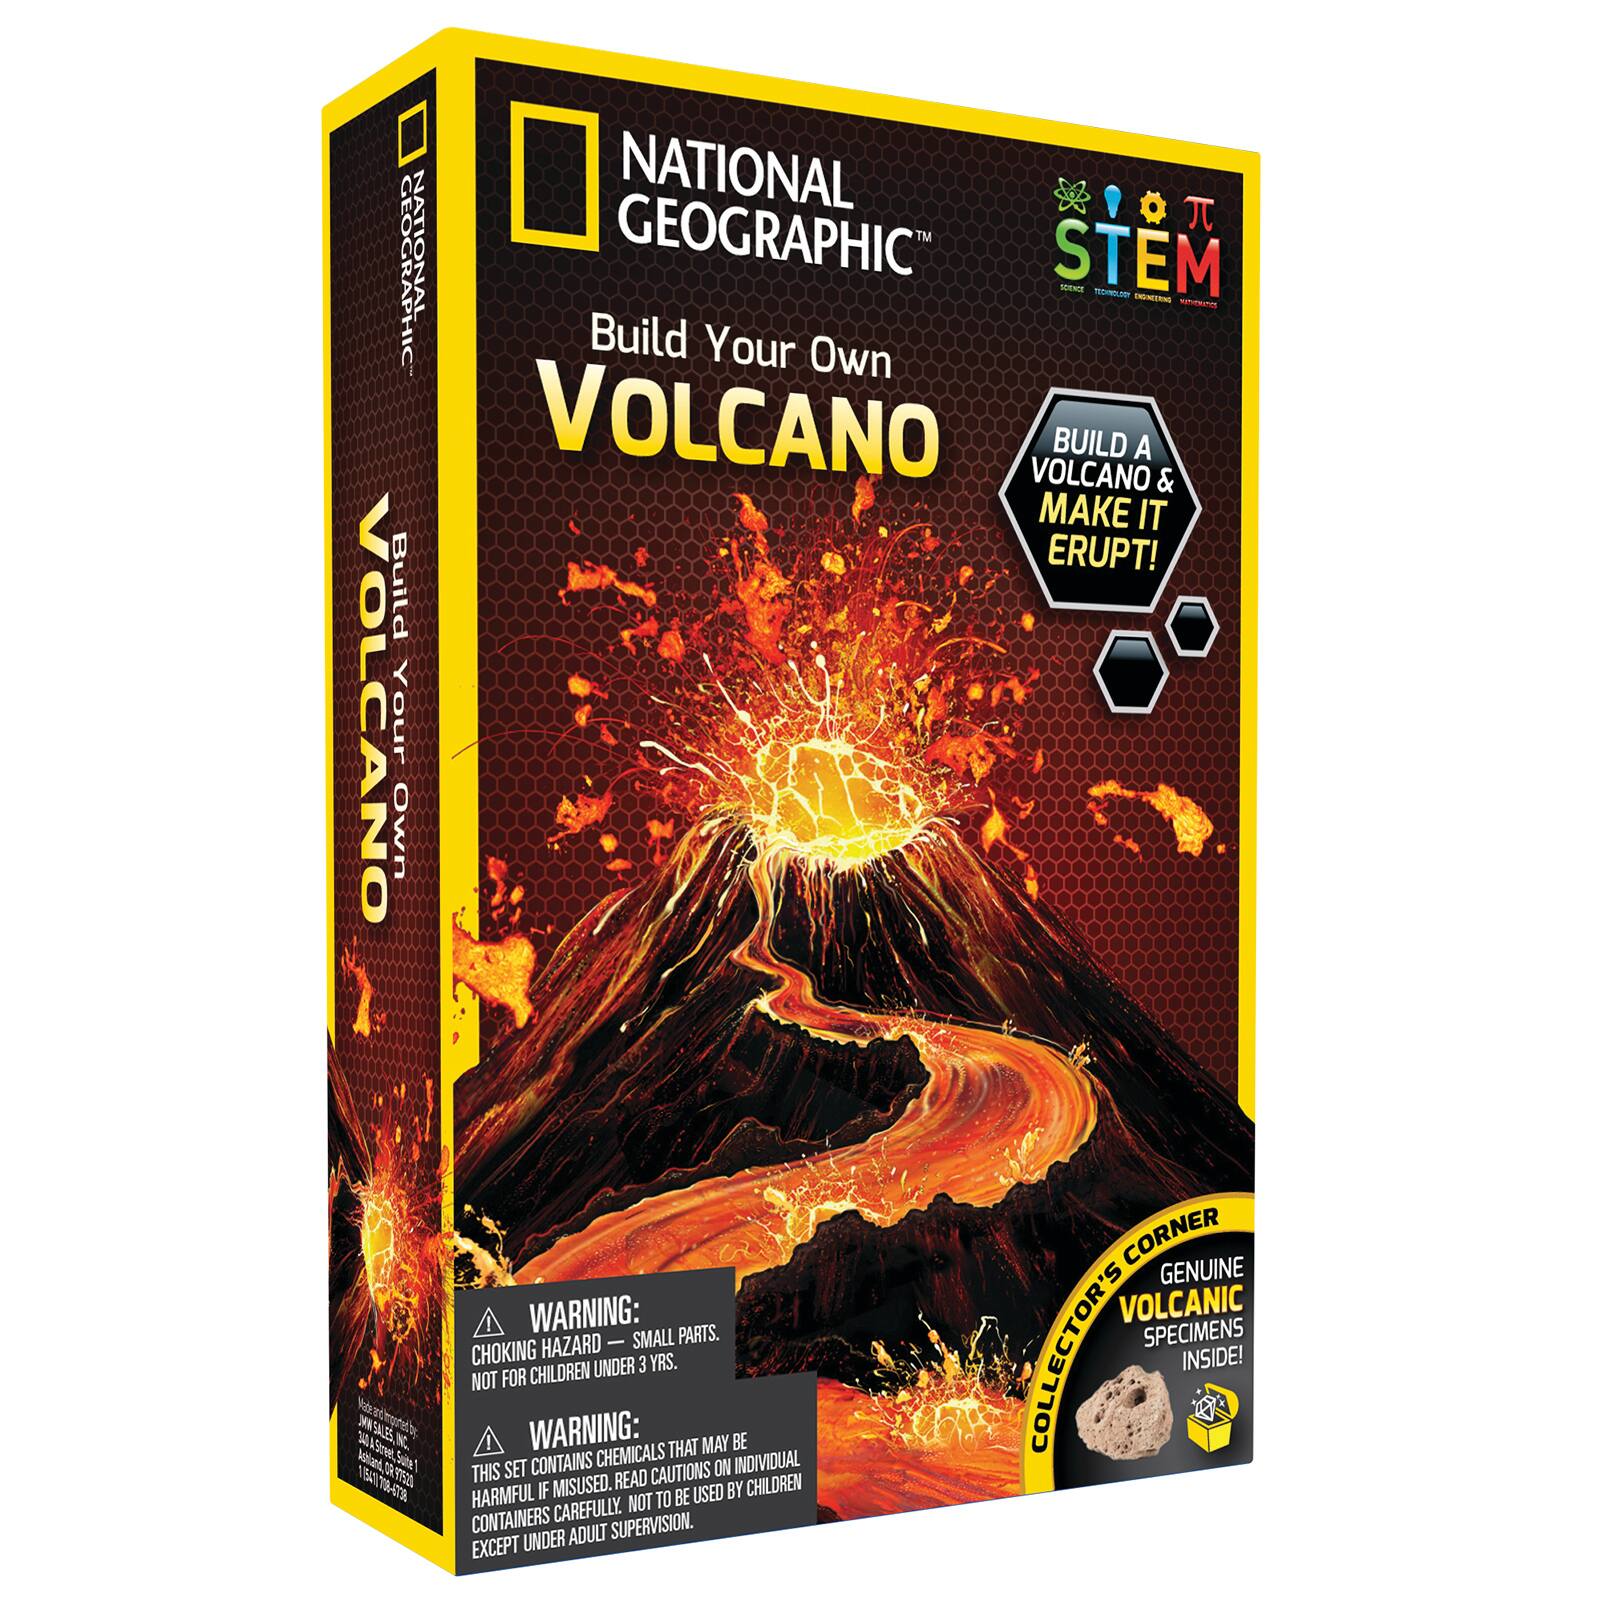 Make a solid volcano with the mould and plaster provided Volcano Making Kit 